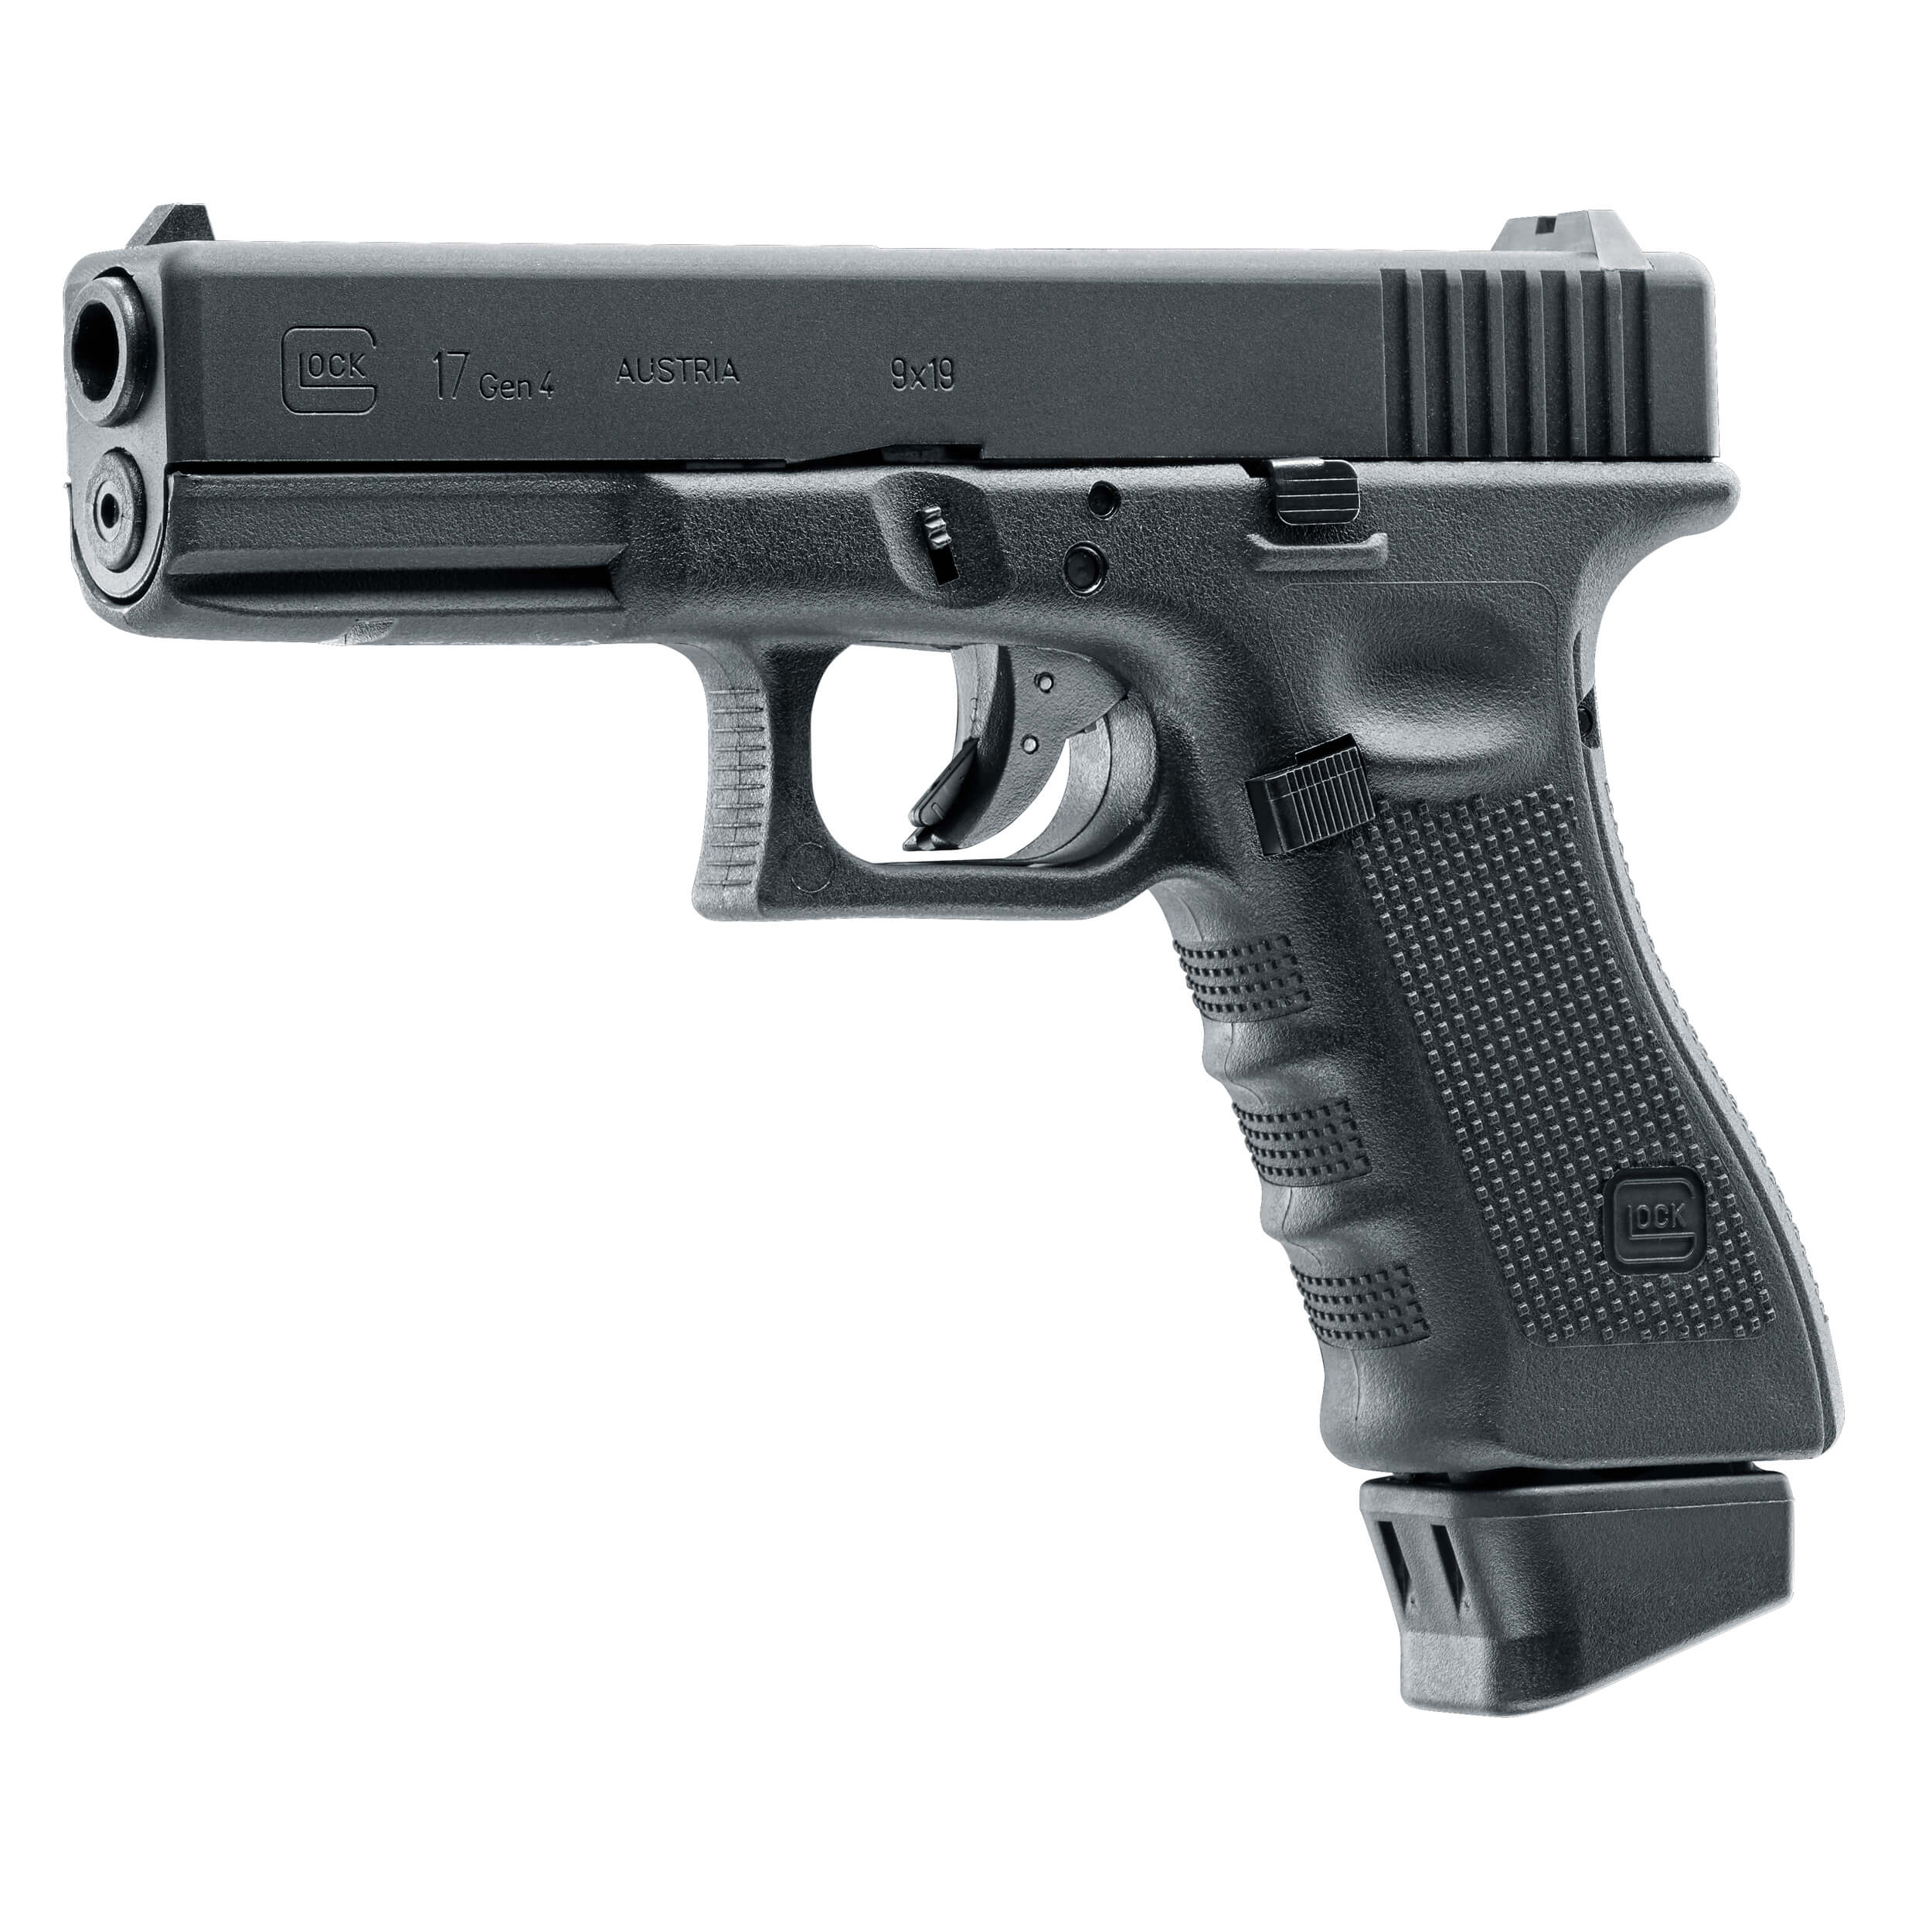 Airsoft GLOCK 17 Gen4 with metal slide and blowback CO2